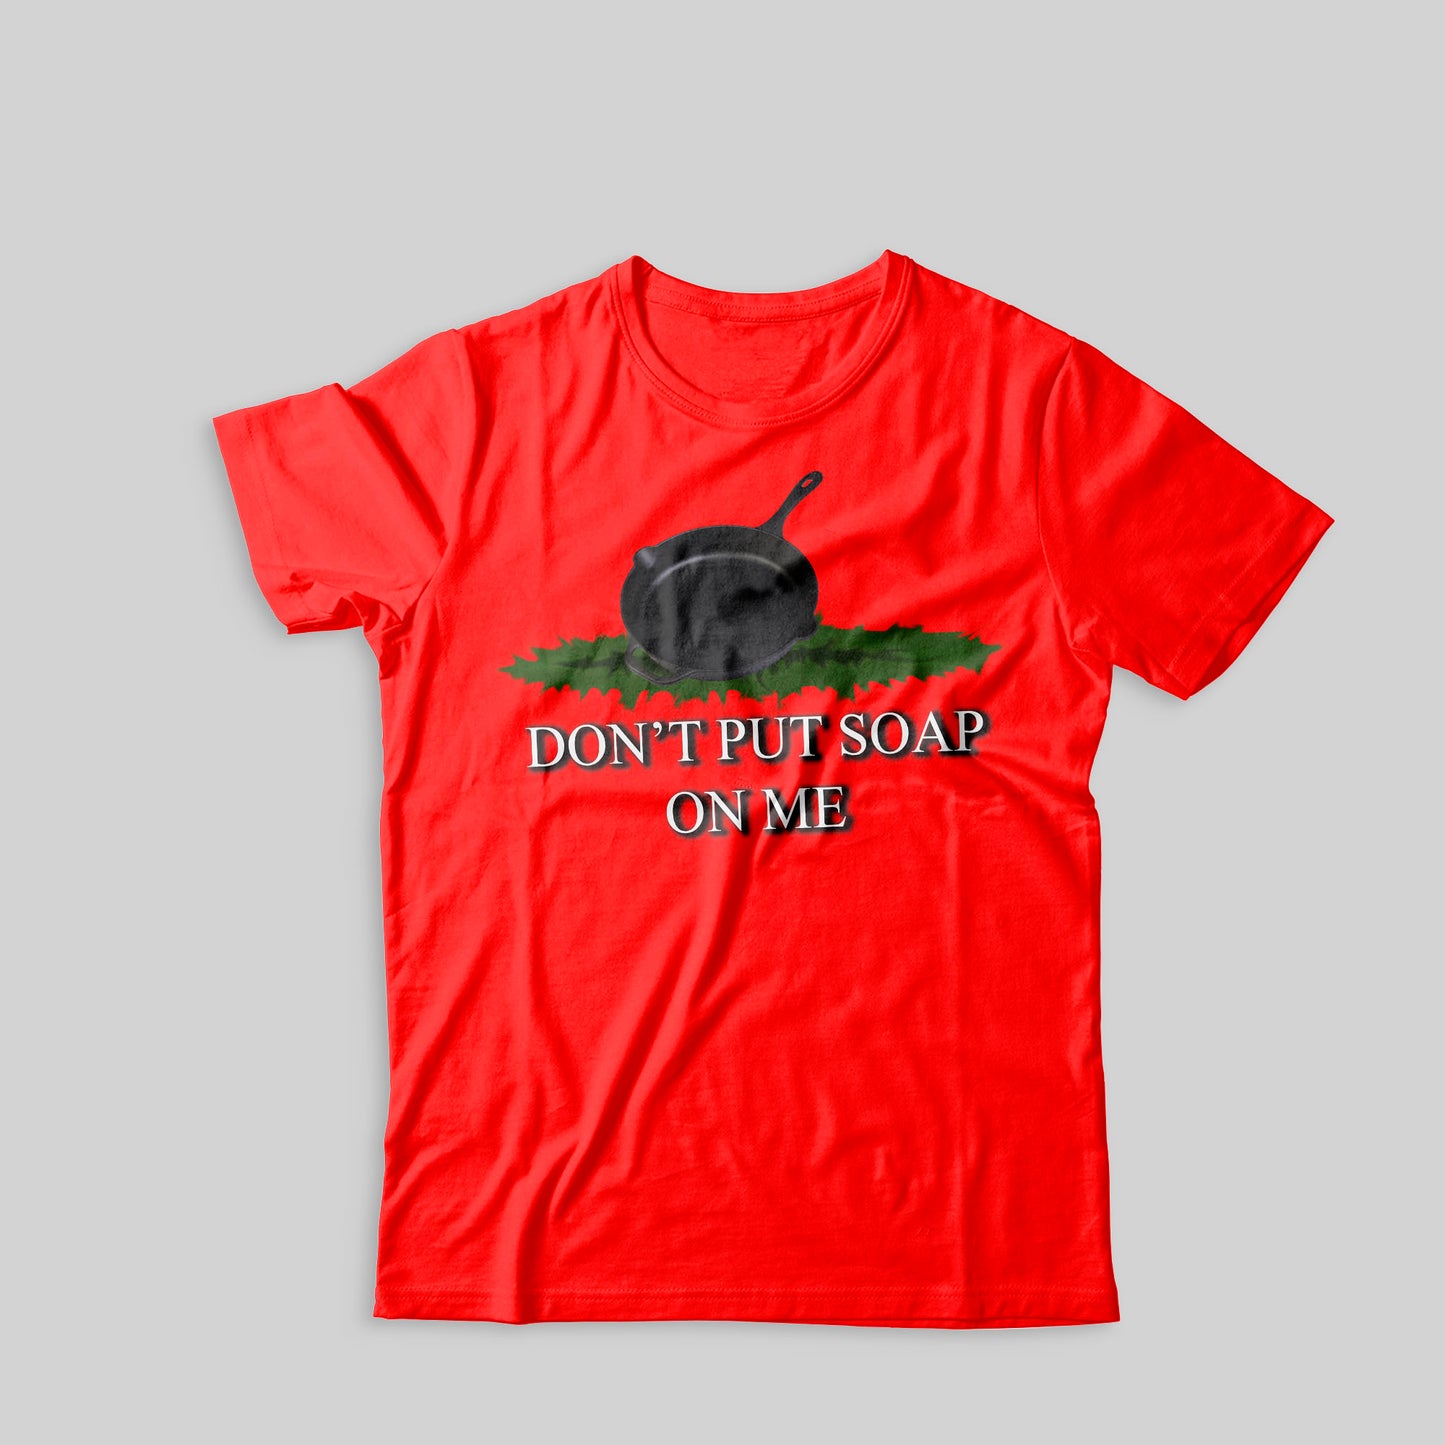 Don't put soap on me unisex t-shirt Christmas gift dads day gift gift for dad gift for grandpa gift for her gift for him gift for mom gift for sister gift for wife moms gift Unique gift